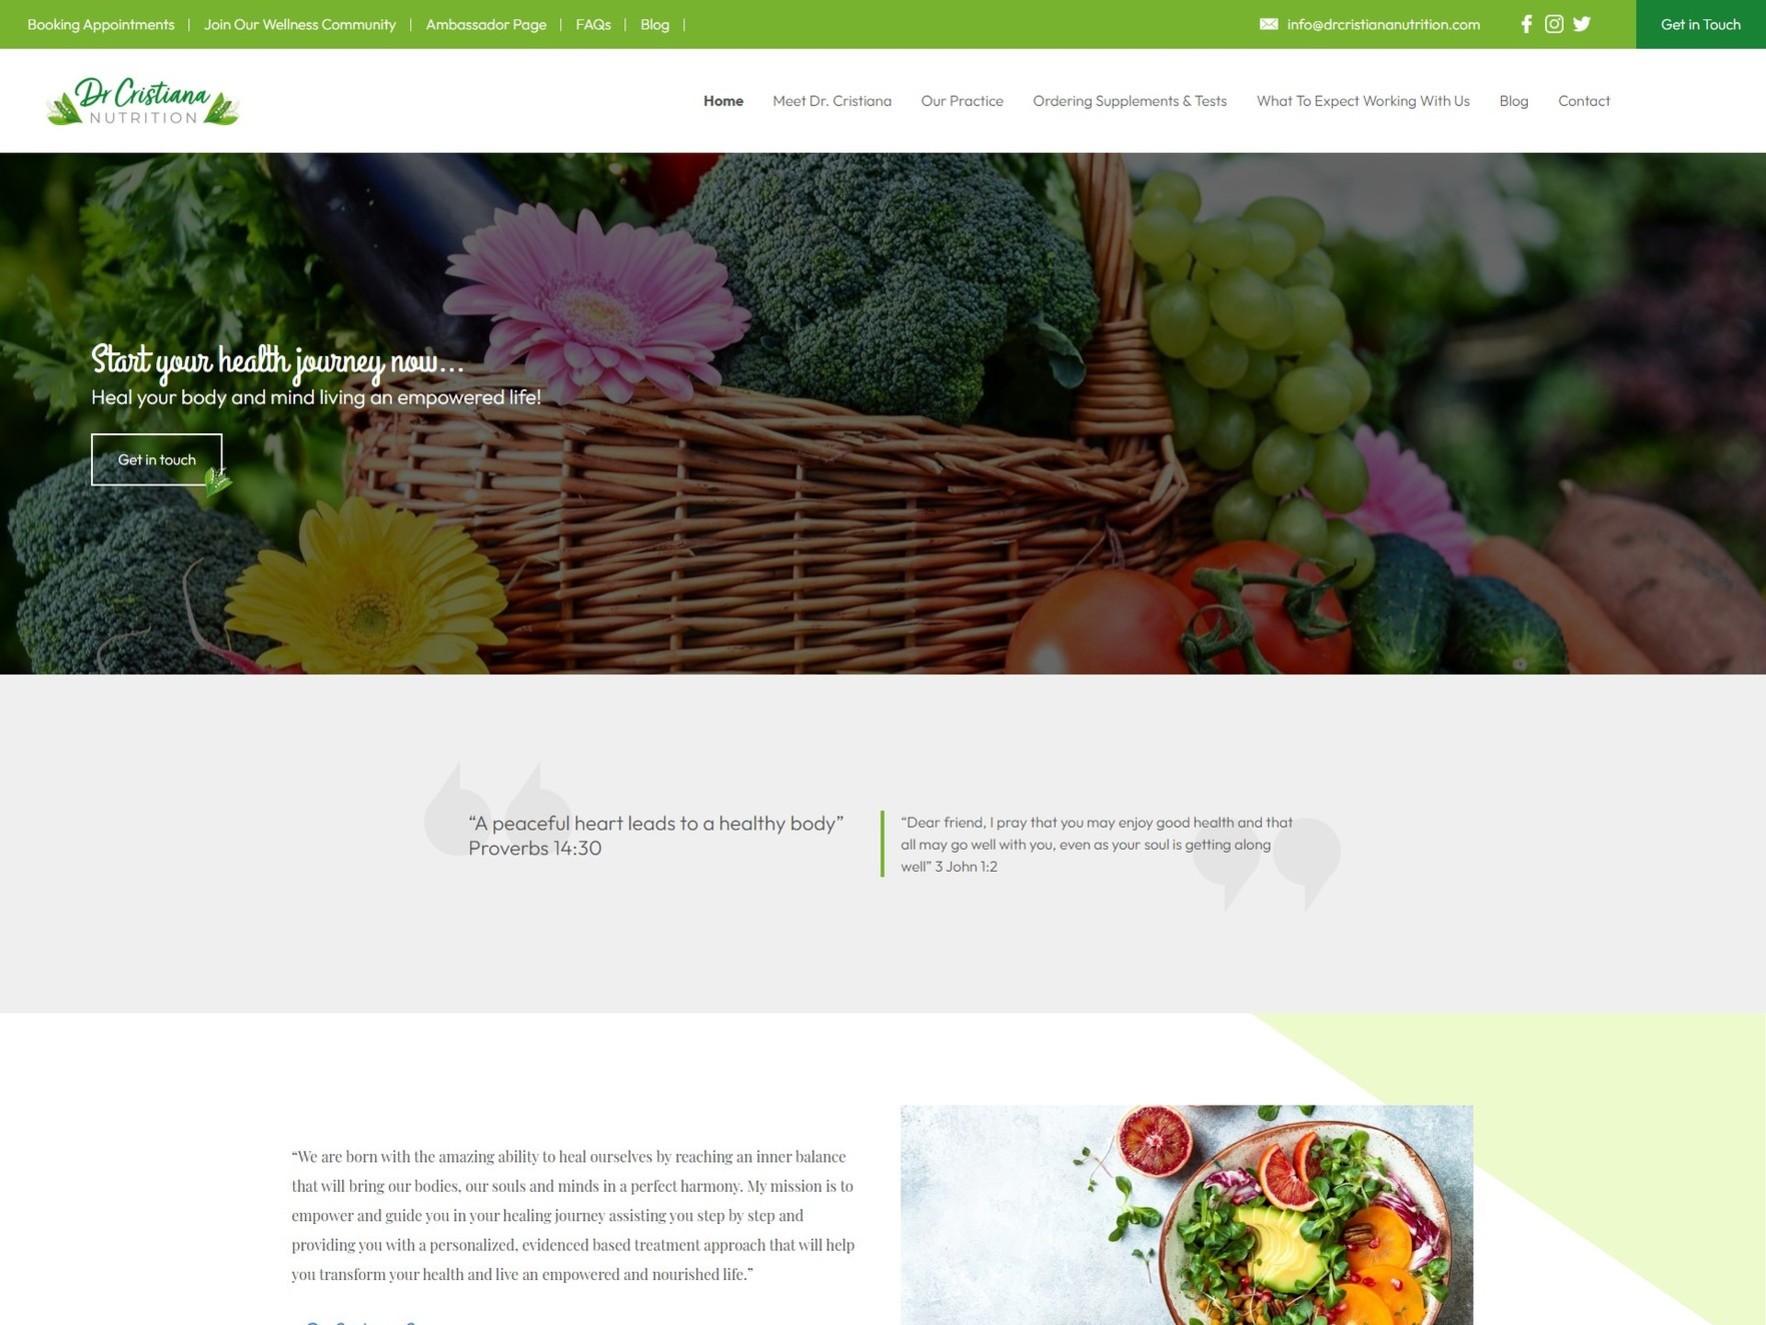 A website design to encourage healthy eating